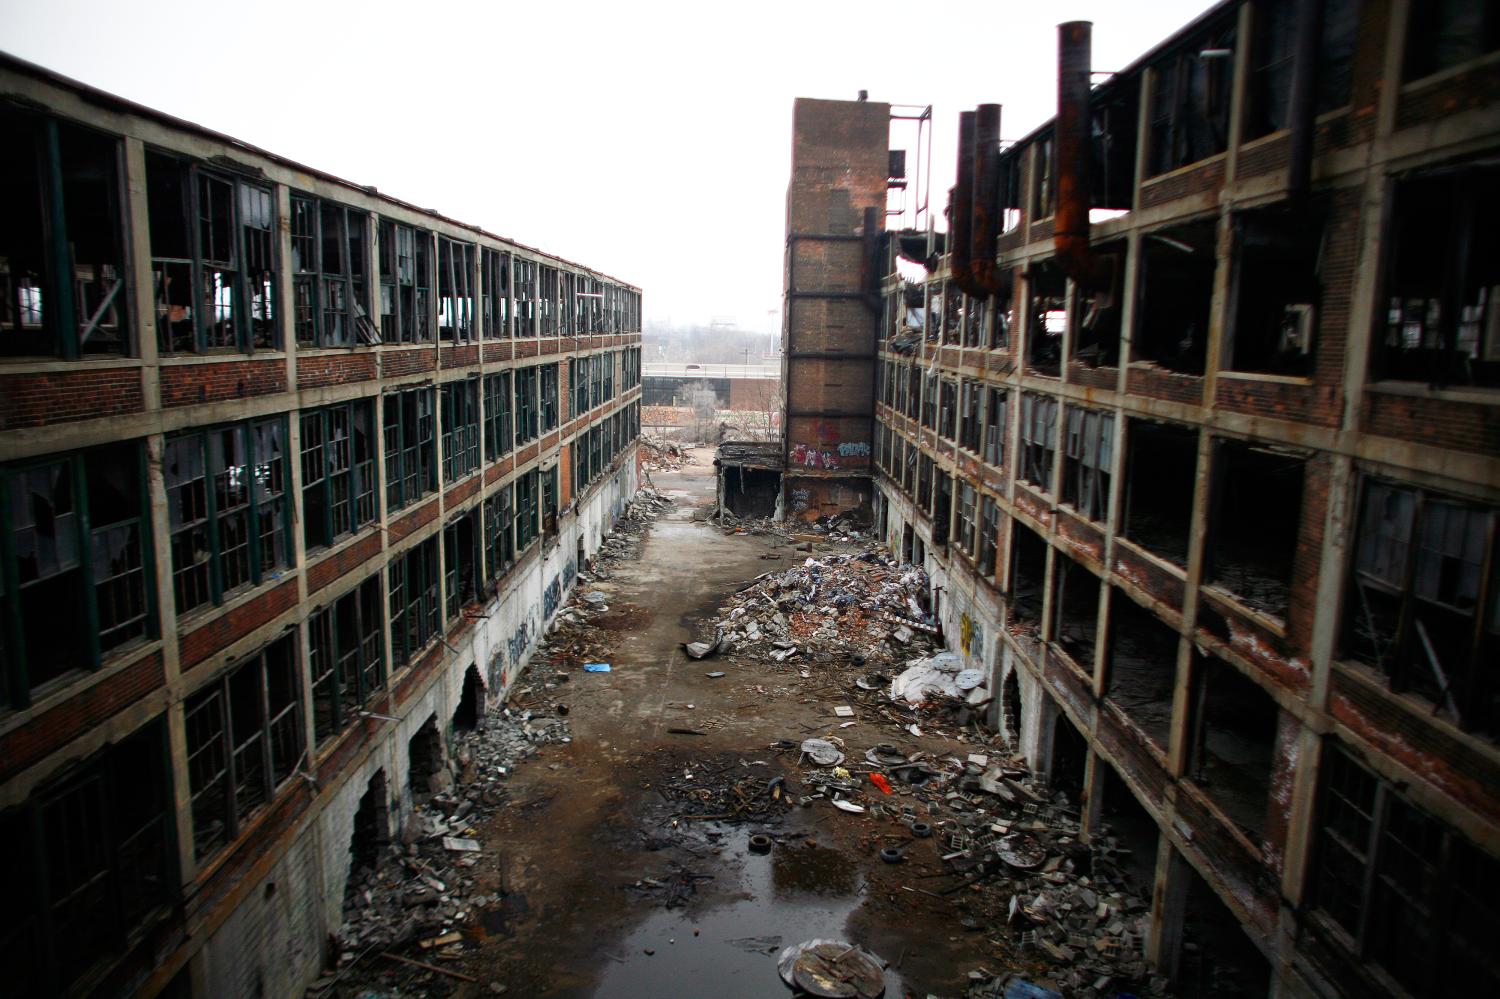 The abandoned and decaying manufacturing plant of Packard Motor Car is seen in Detroit, Michigan April 2, 2011.